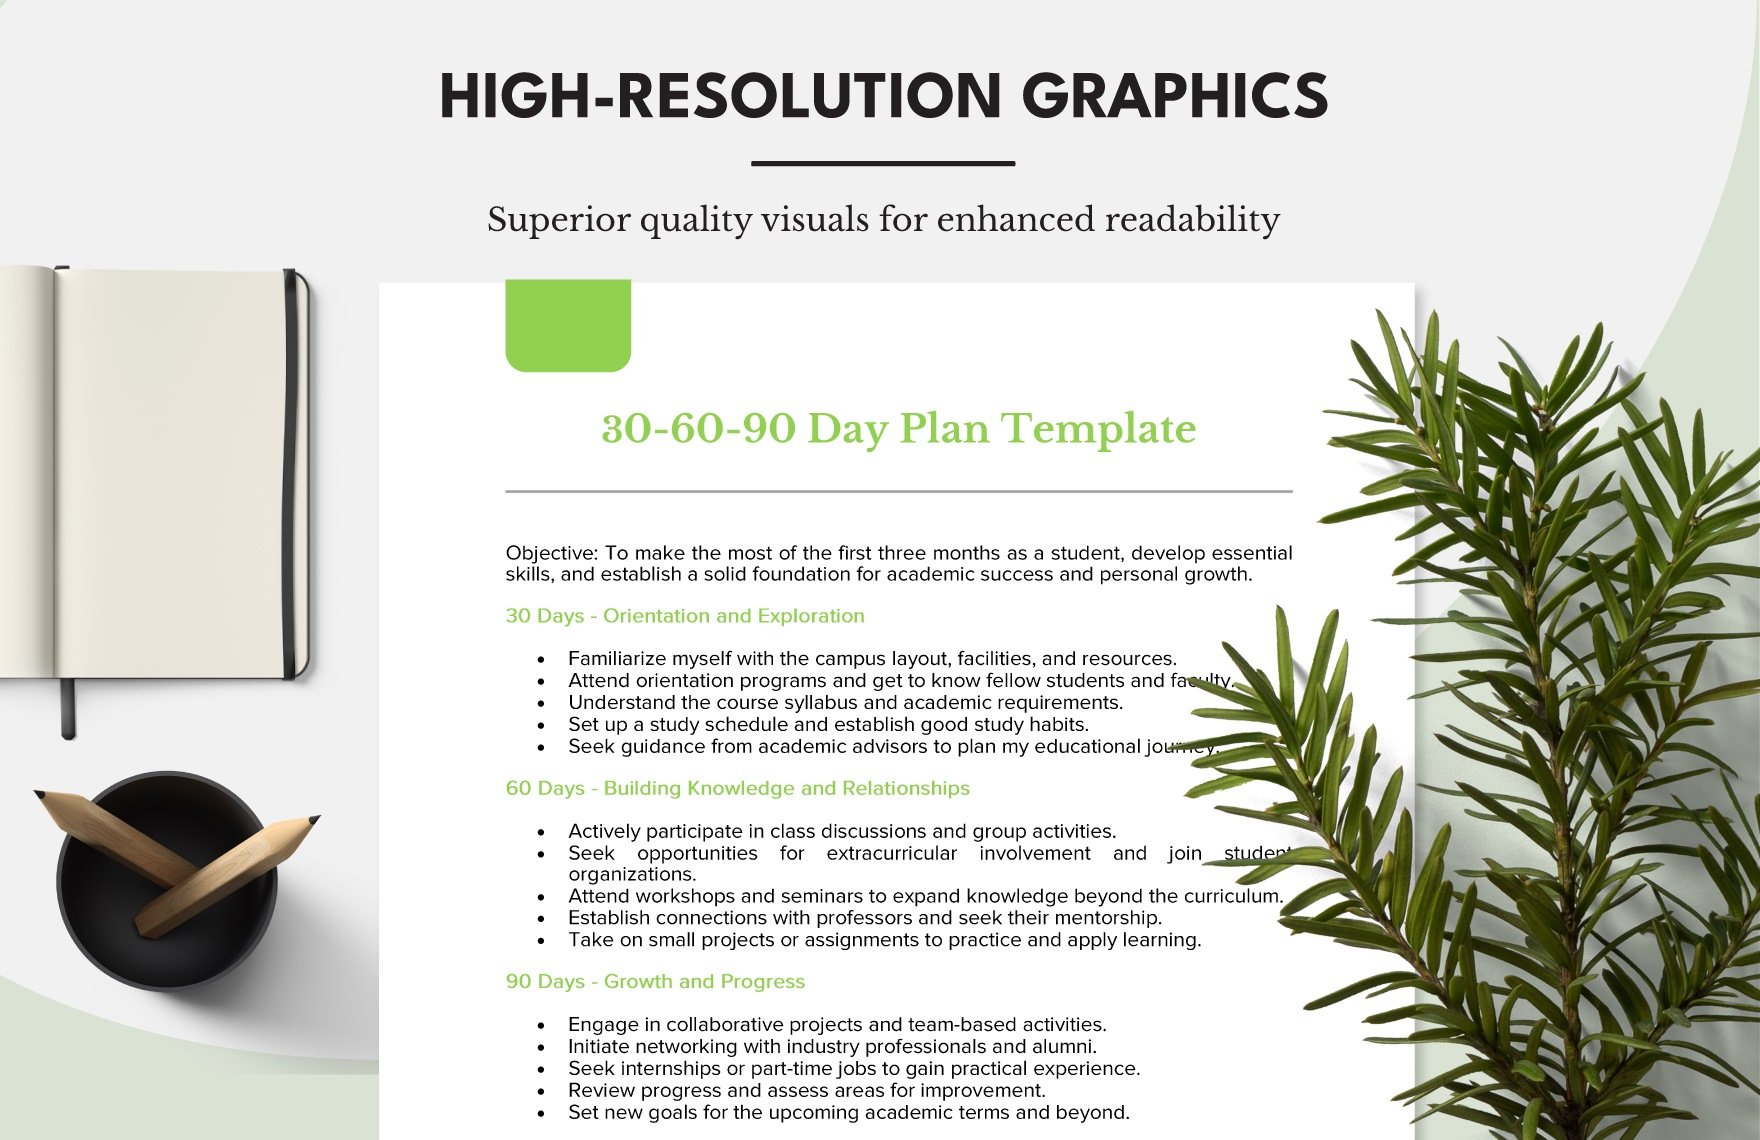 30 60 90 Day Plan Template